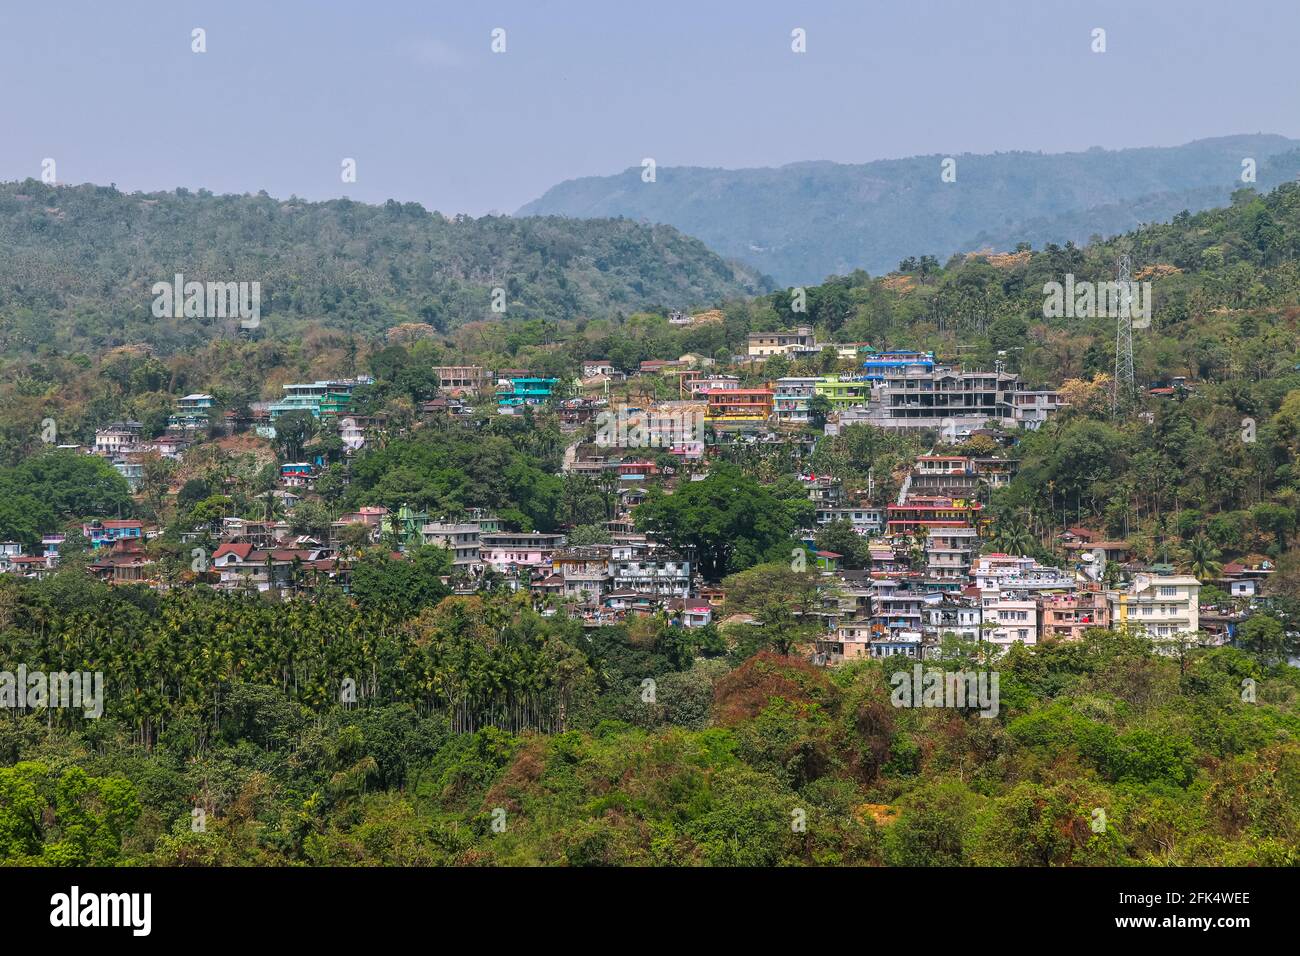 landscape view of a town situated in a hill . Tamabil village India . Stock Photo